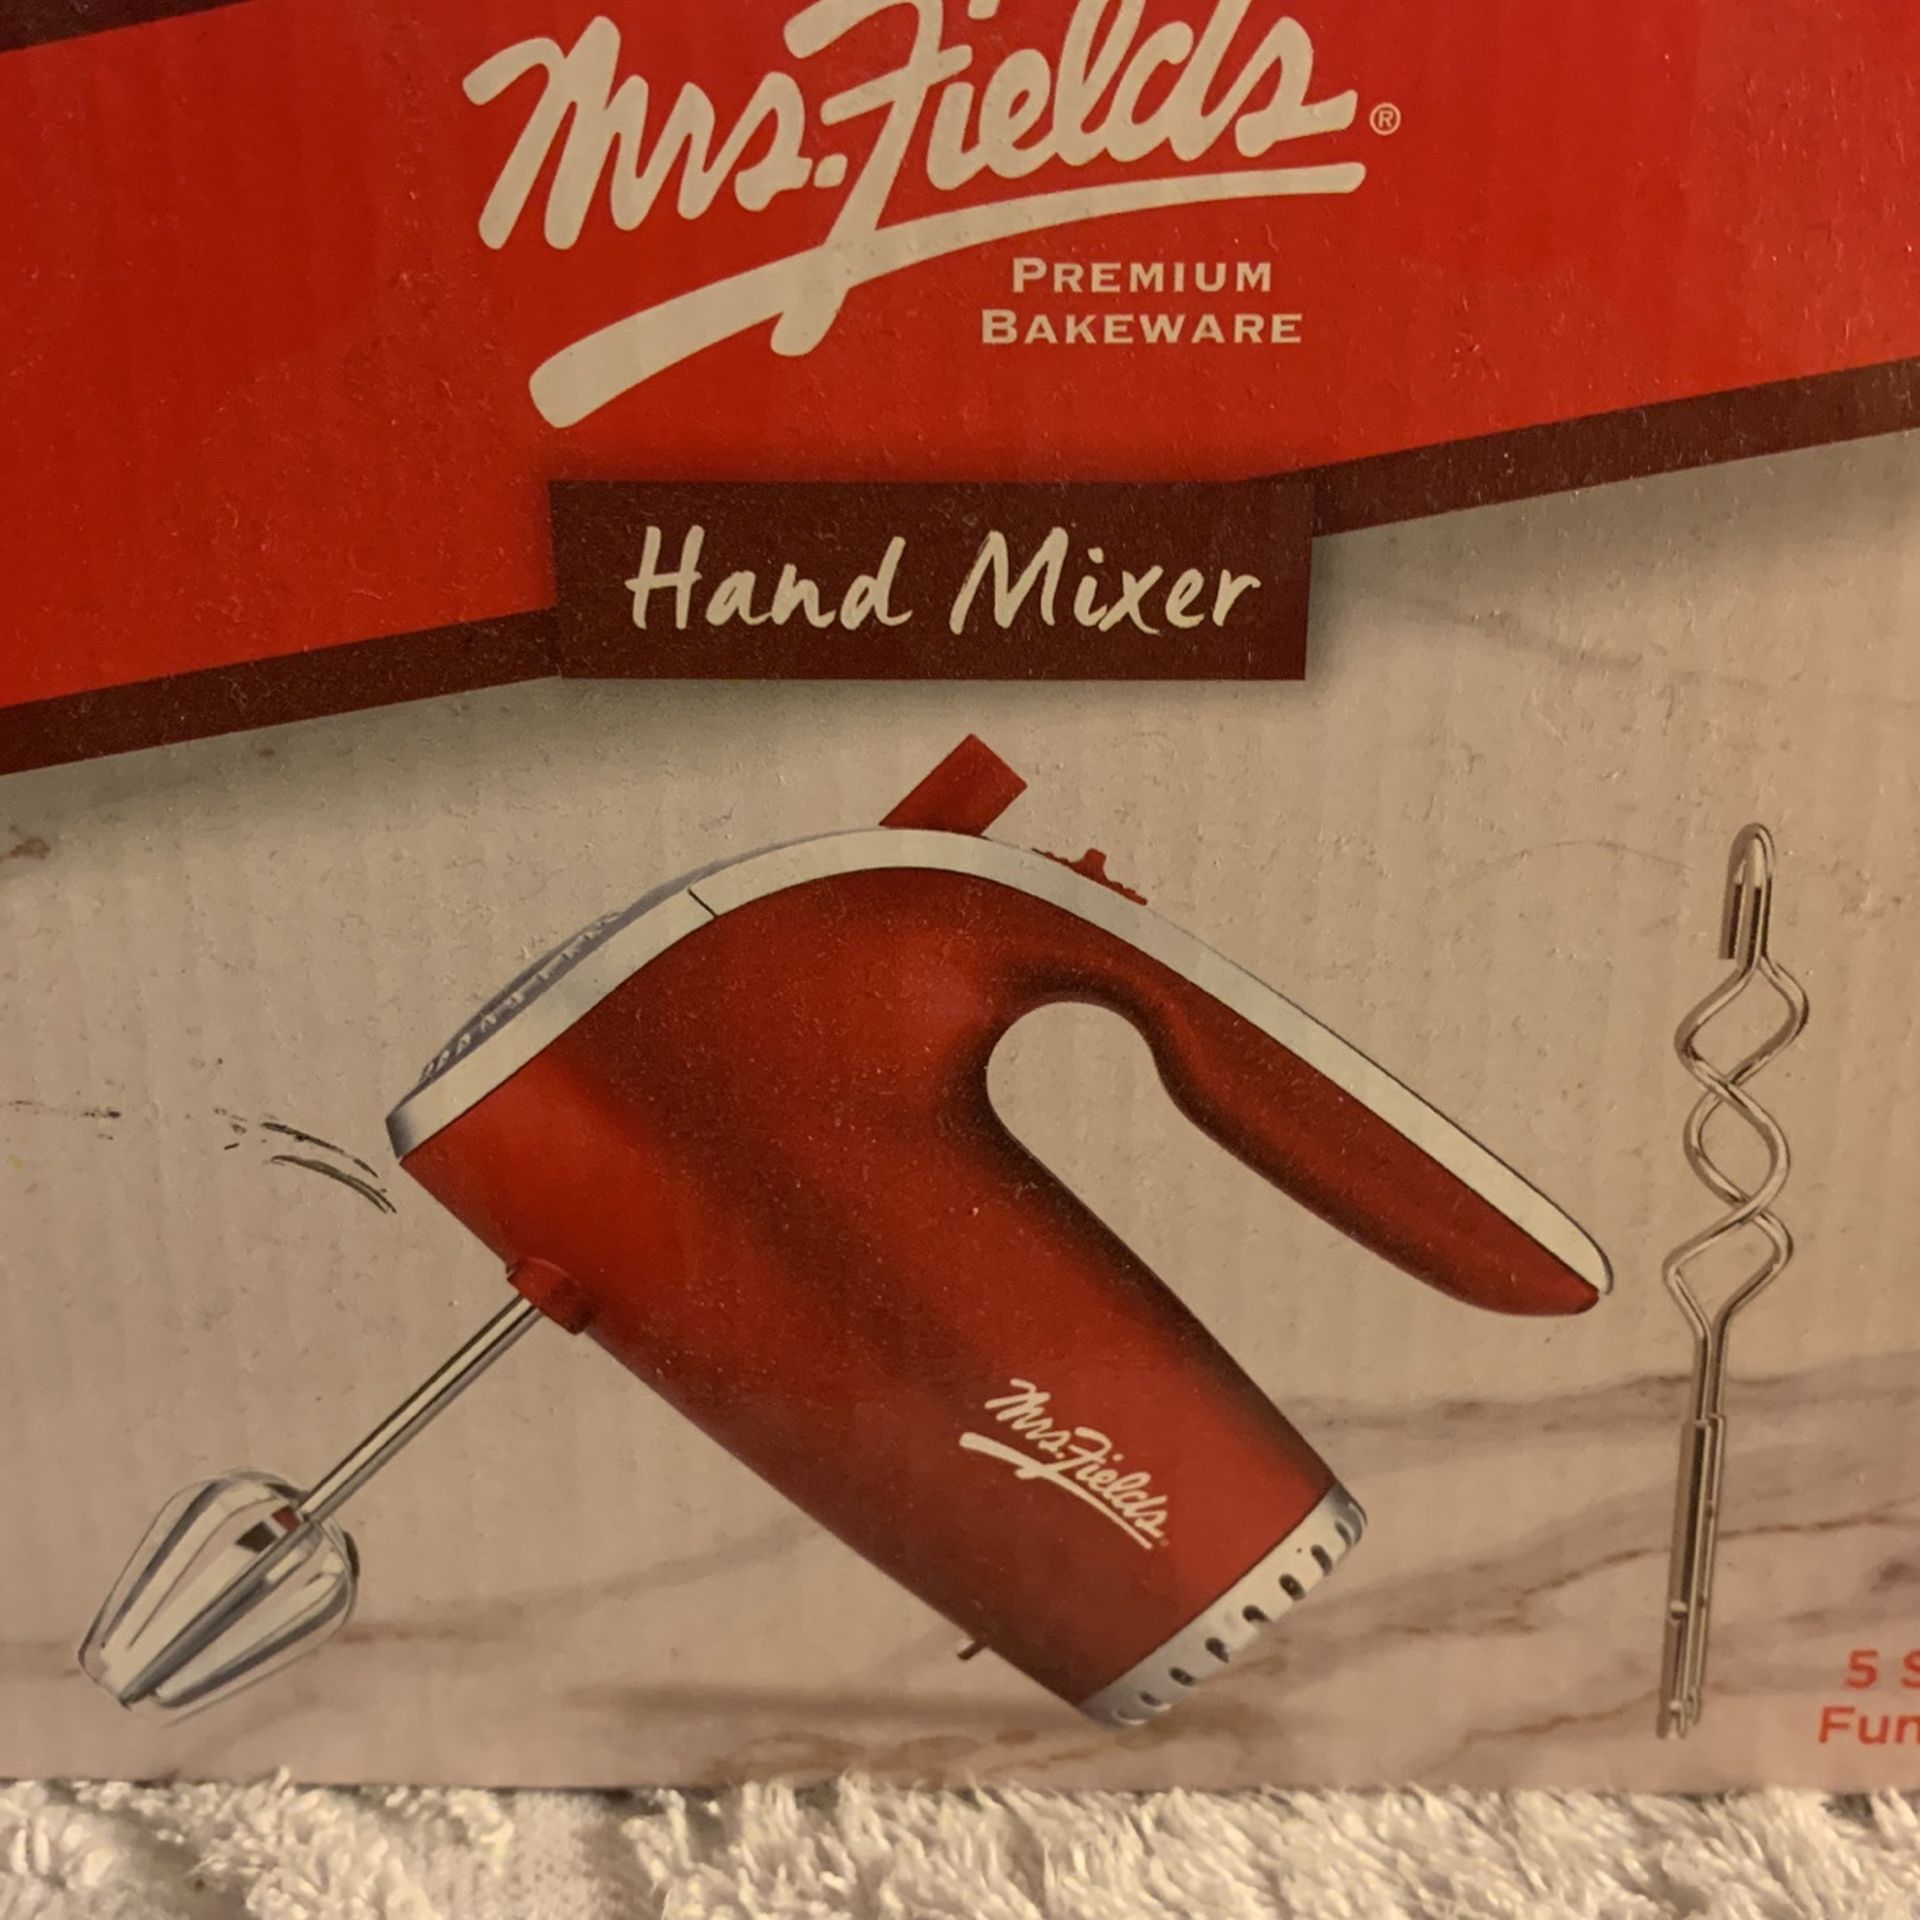 New!! RABBIT Electric Cocktail Mixer !Shaker Bar Tools Gadgets Mixer Drink  Red! for Sale in Florence, AZ - OfferUp